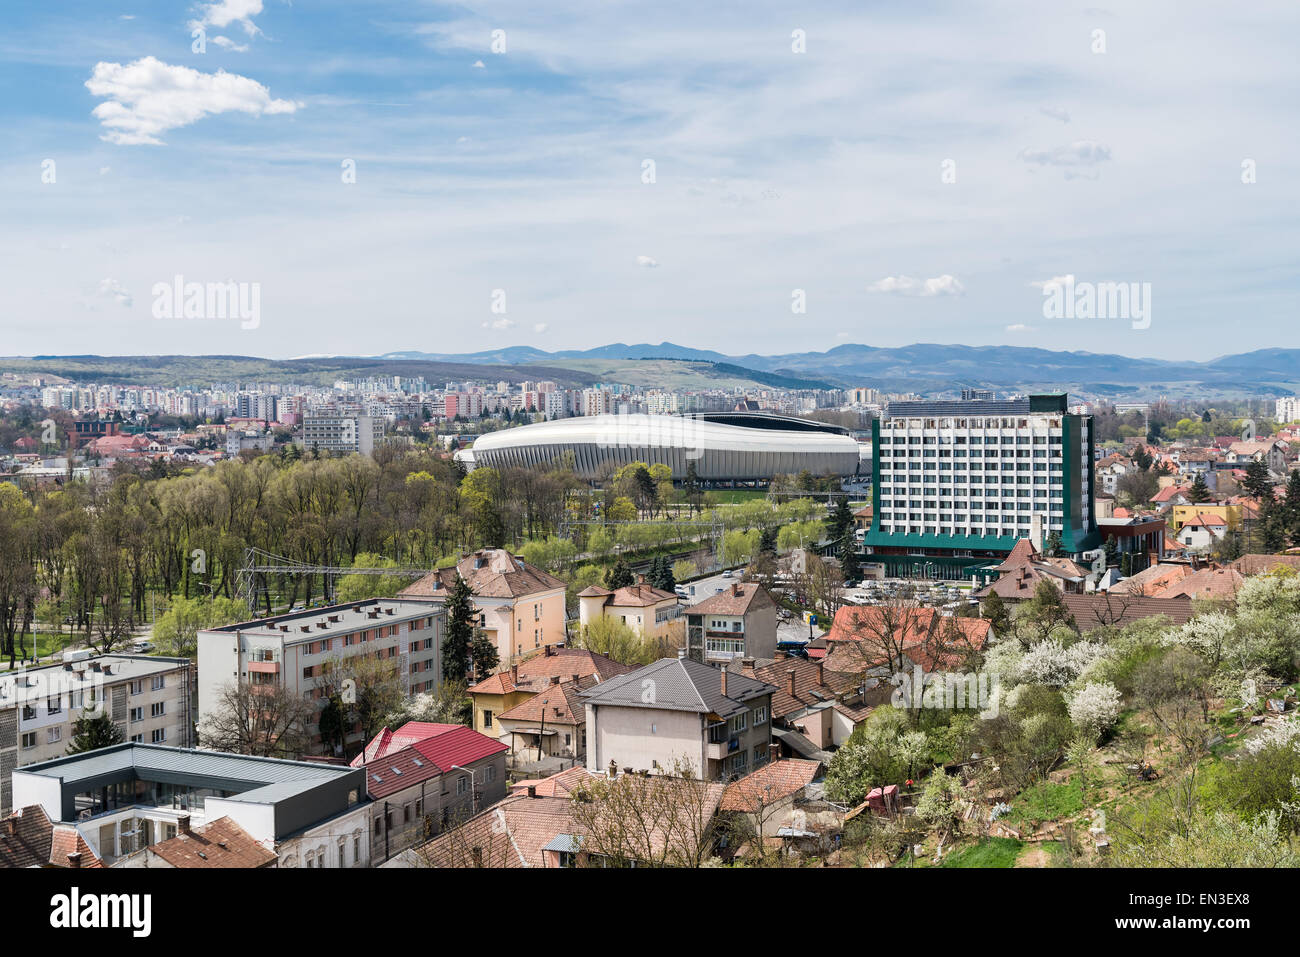 High View Of Cluj Napoca City Buildings And Stadium In Romania Stock Photo